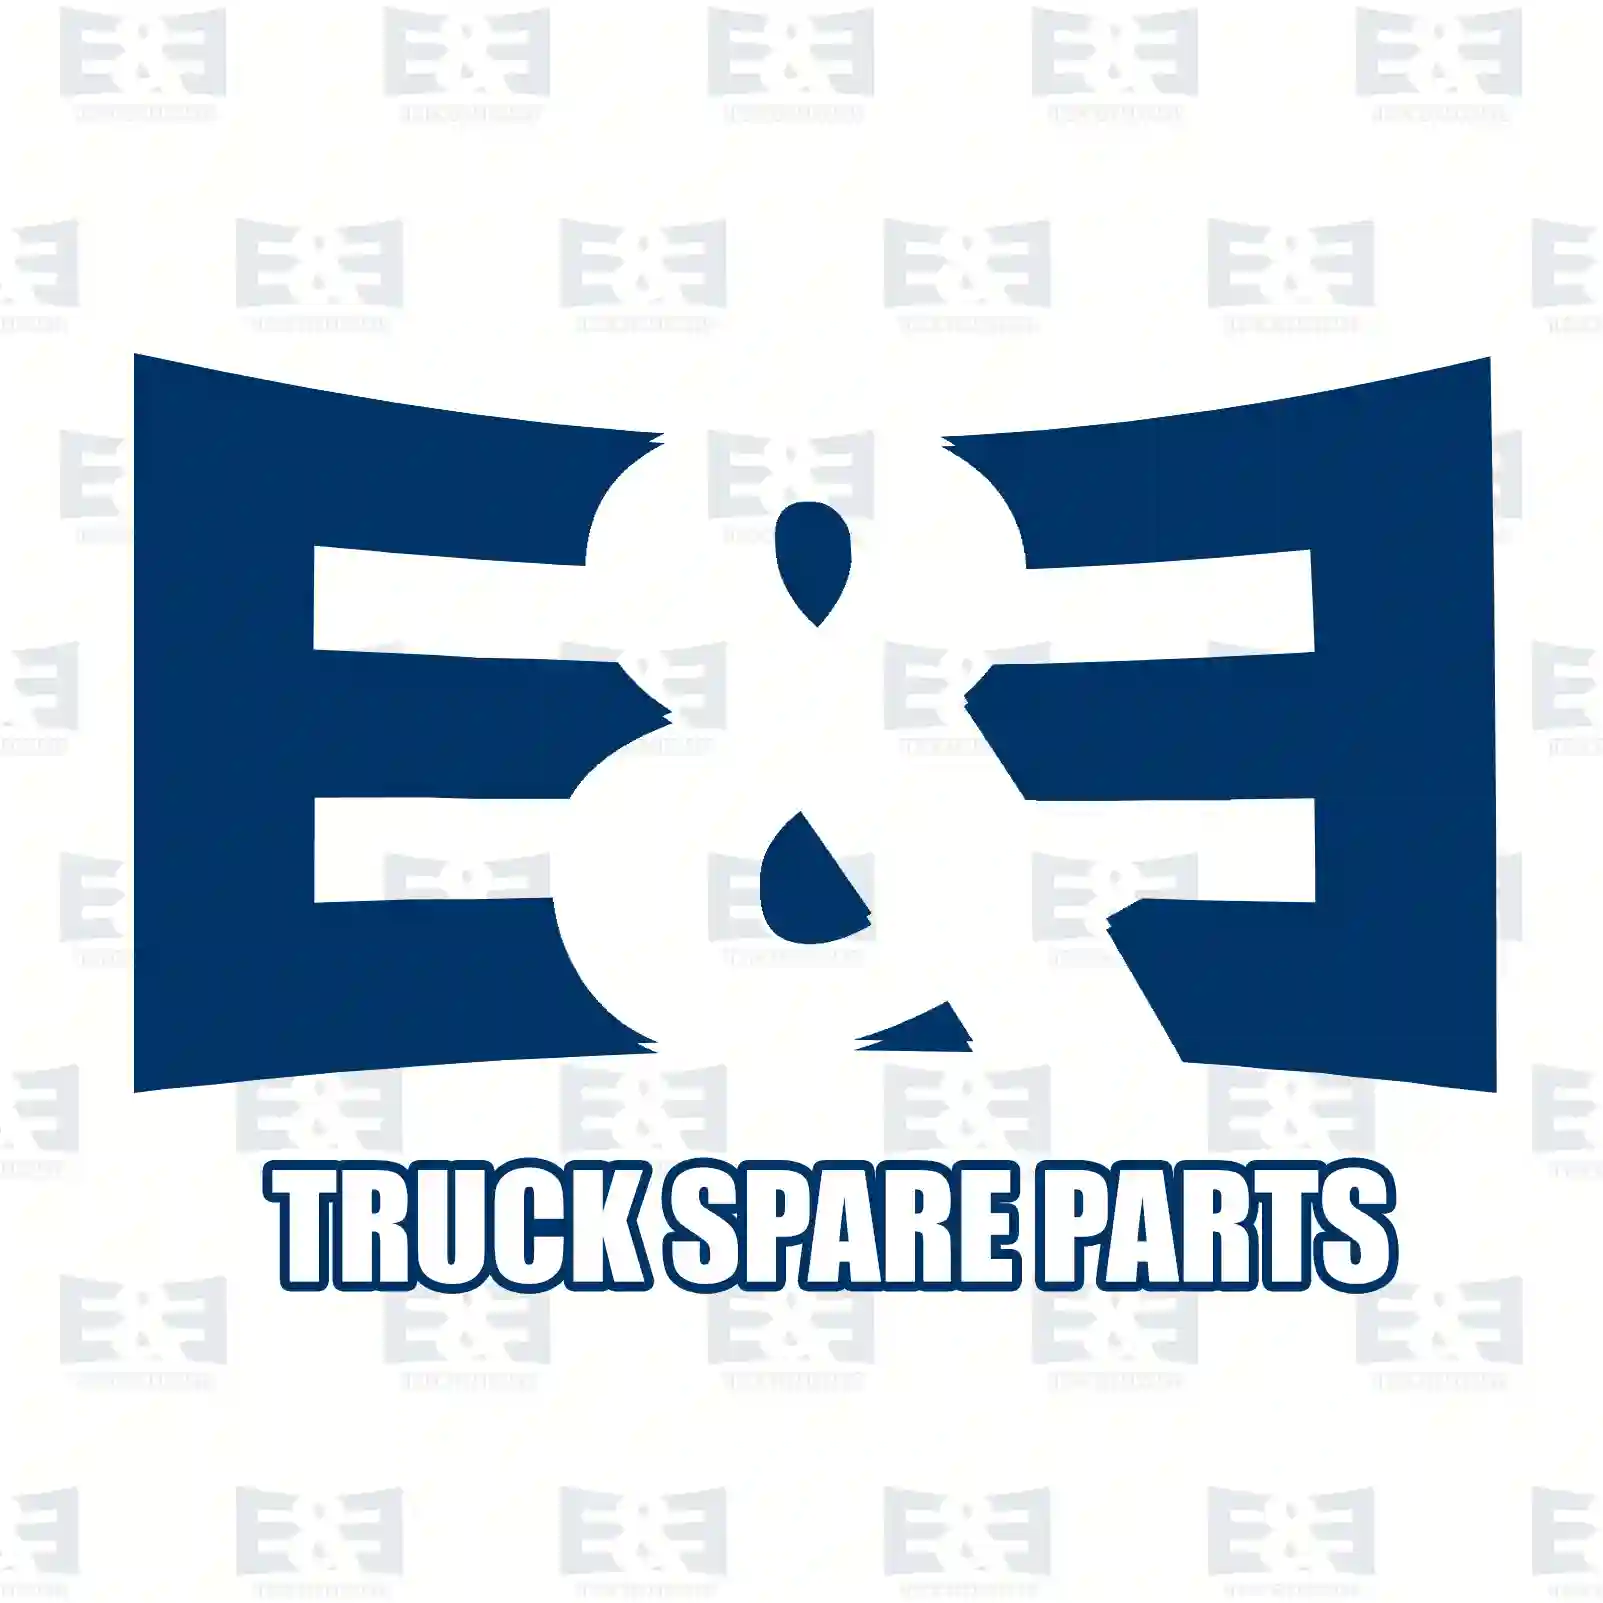  Disc brake pad kit, with accessories || E&E Truck Spare Parts | Truck Spare Parts, Auotomotive Spare Parts